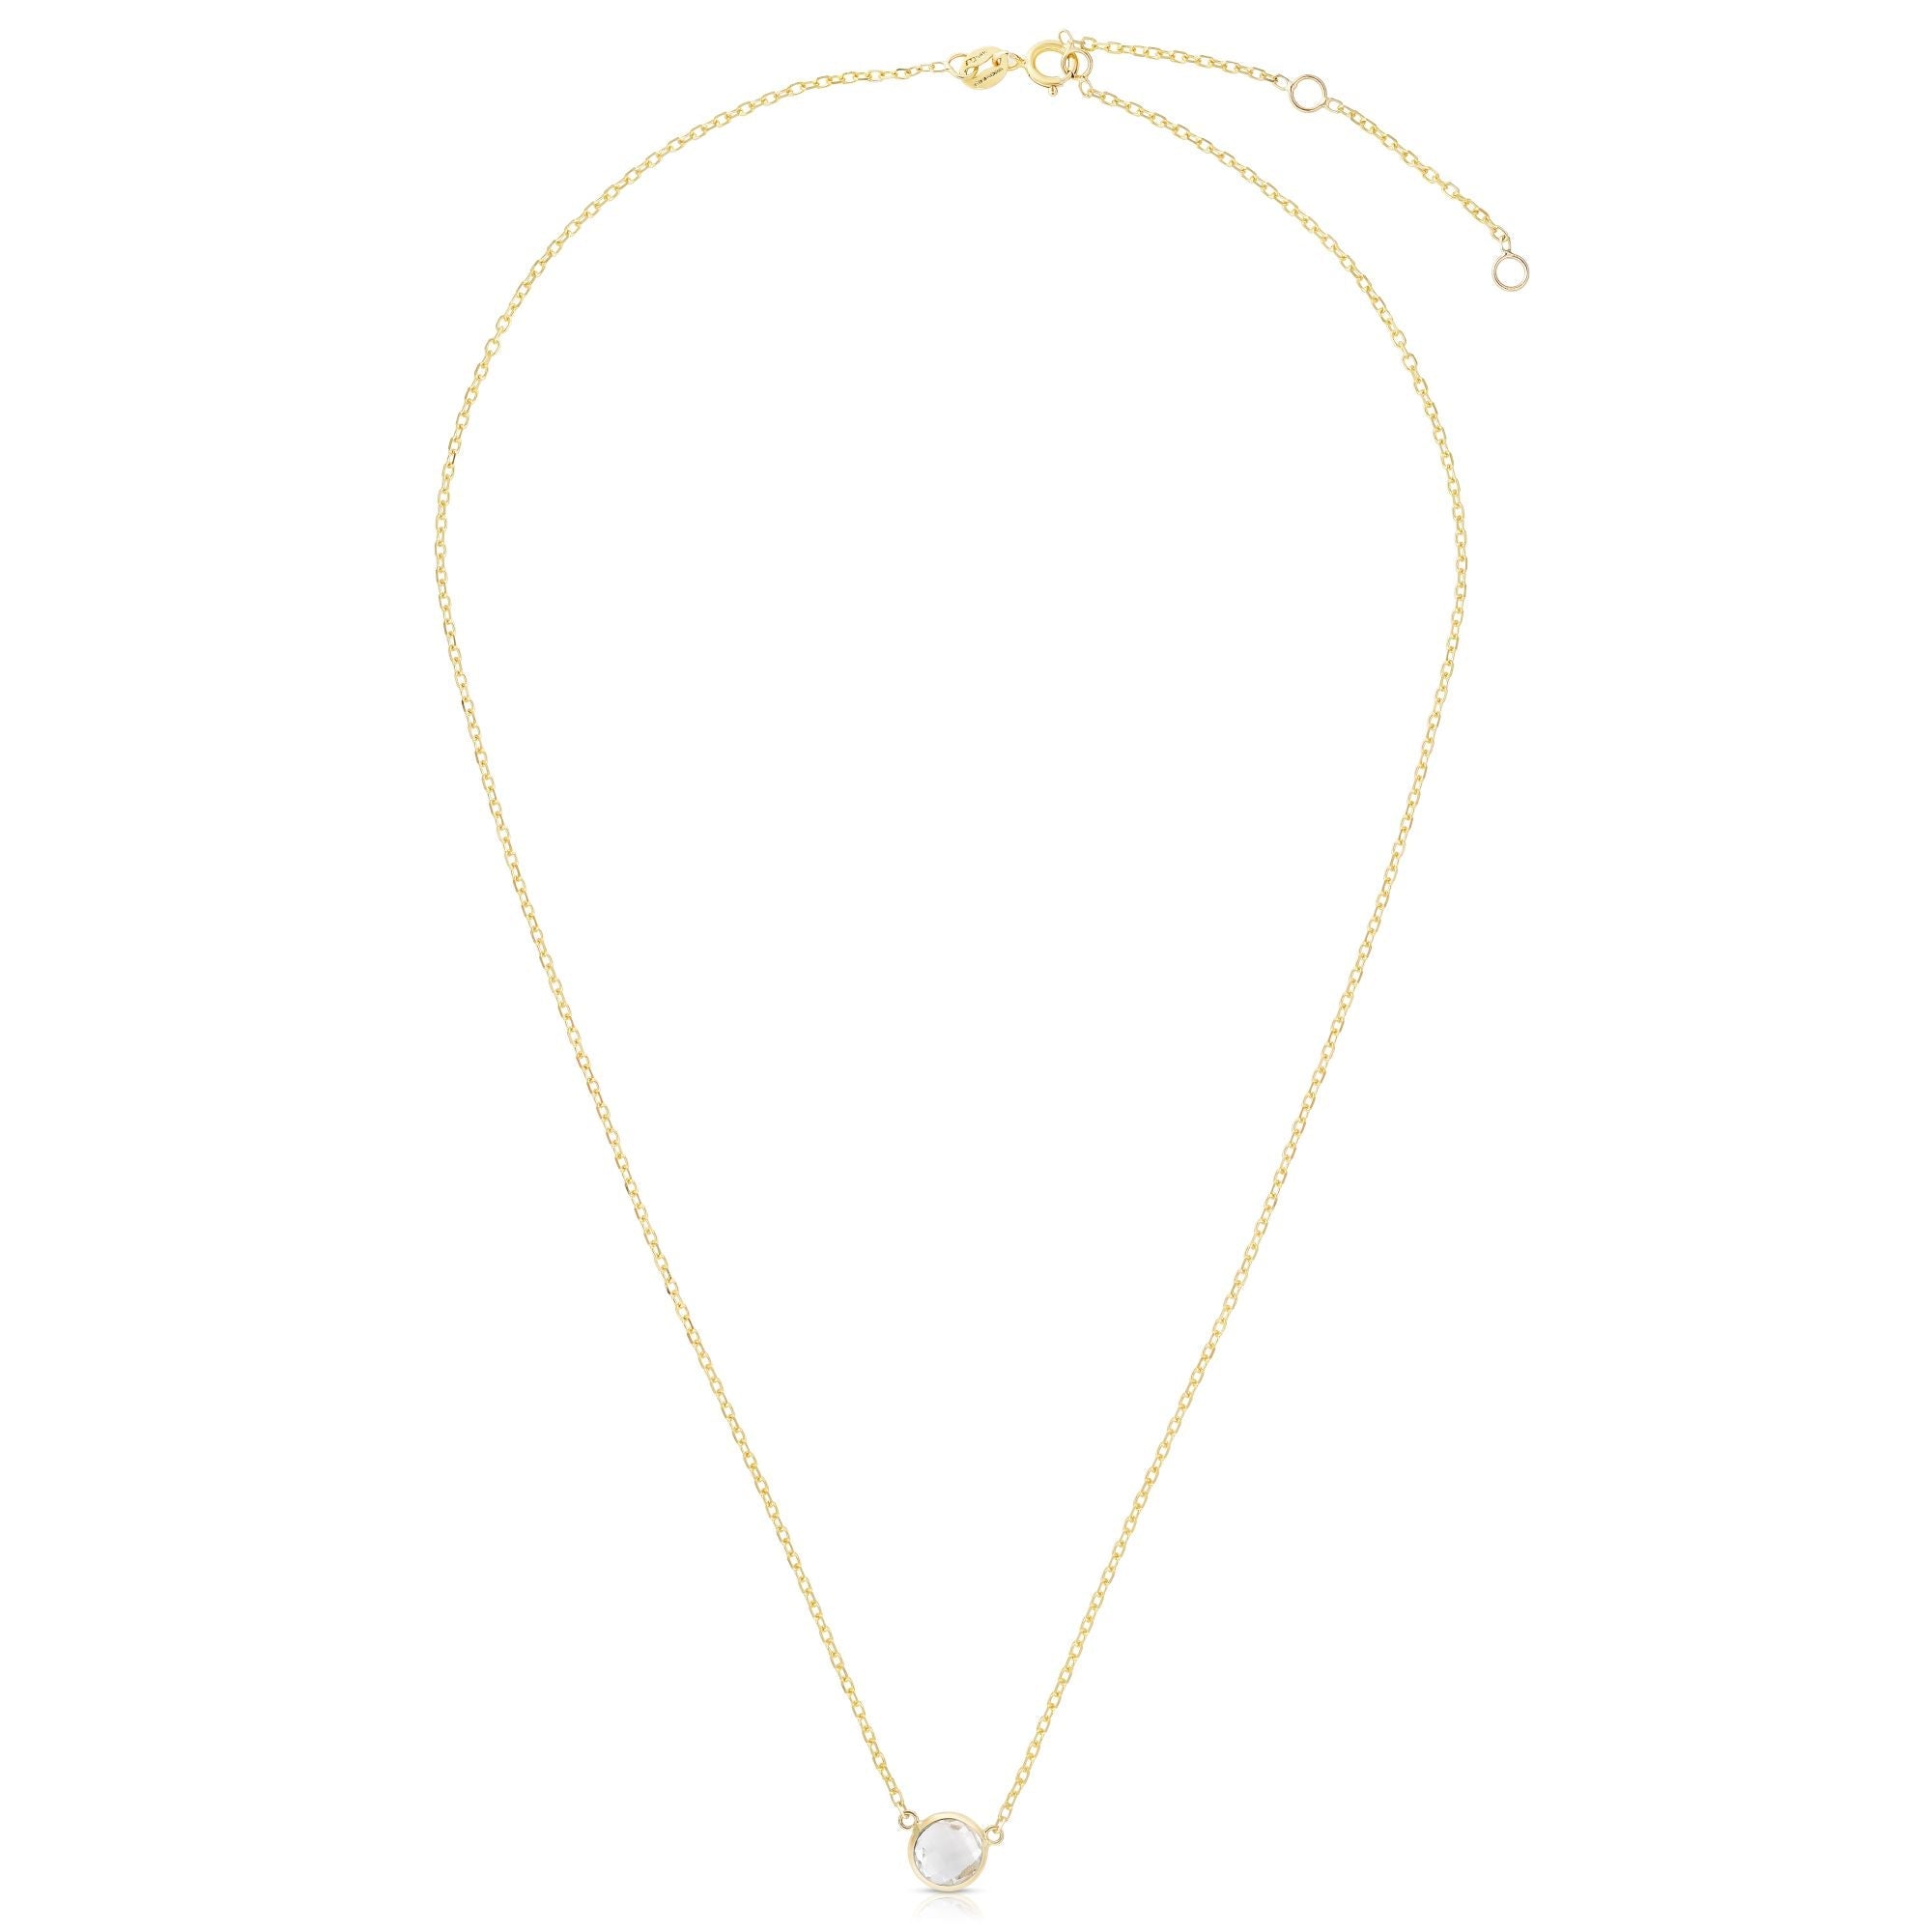 Kiawah Solitaire Necklace by George Francis